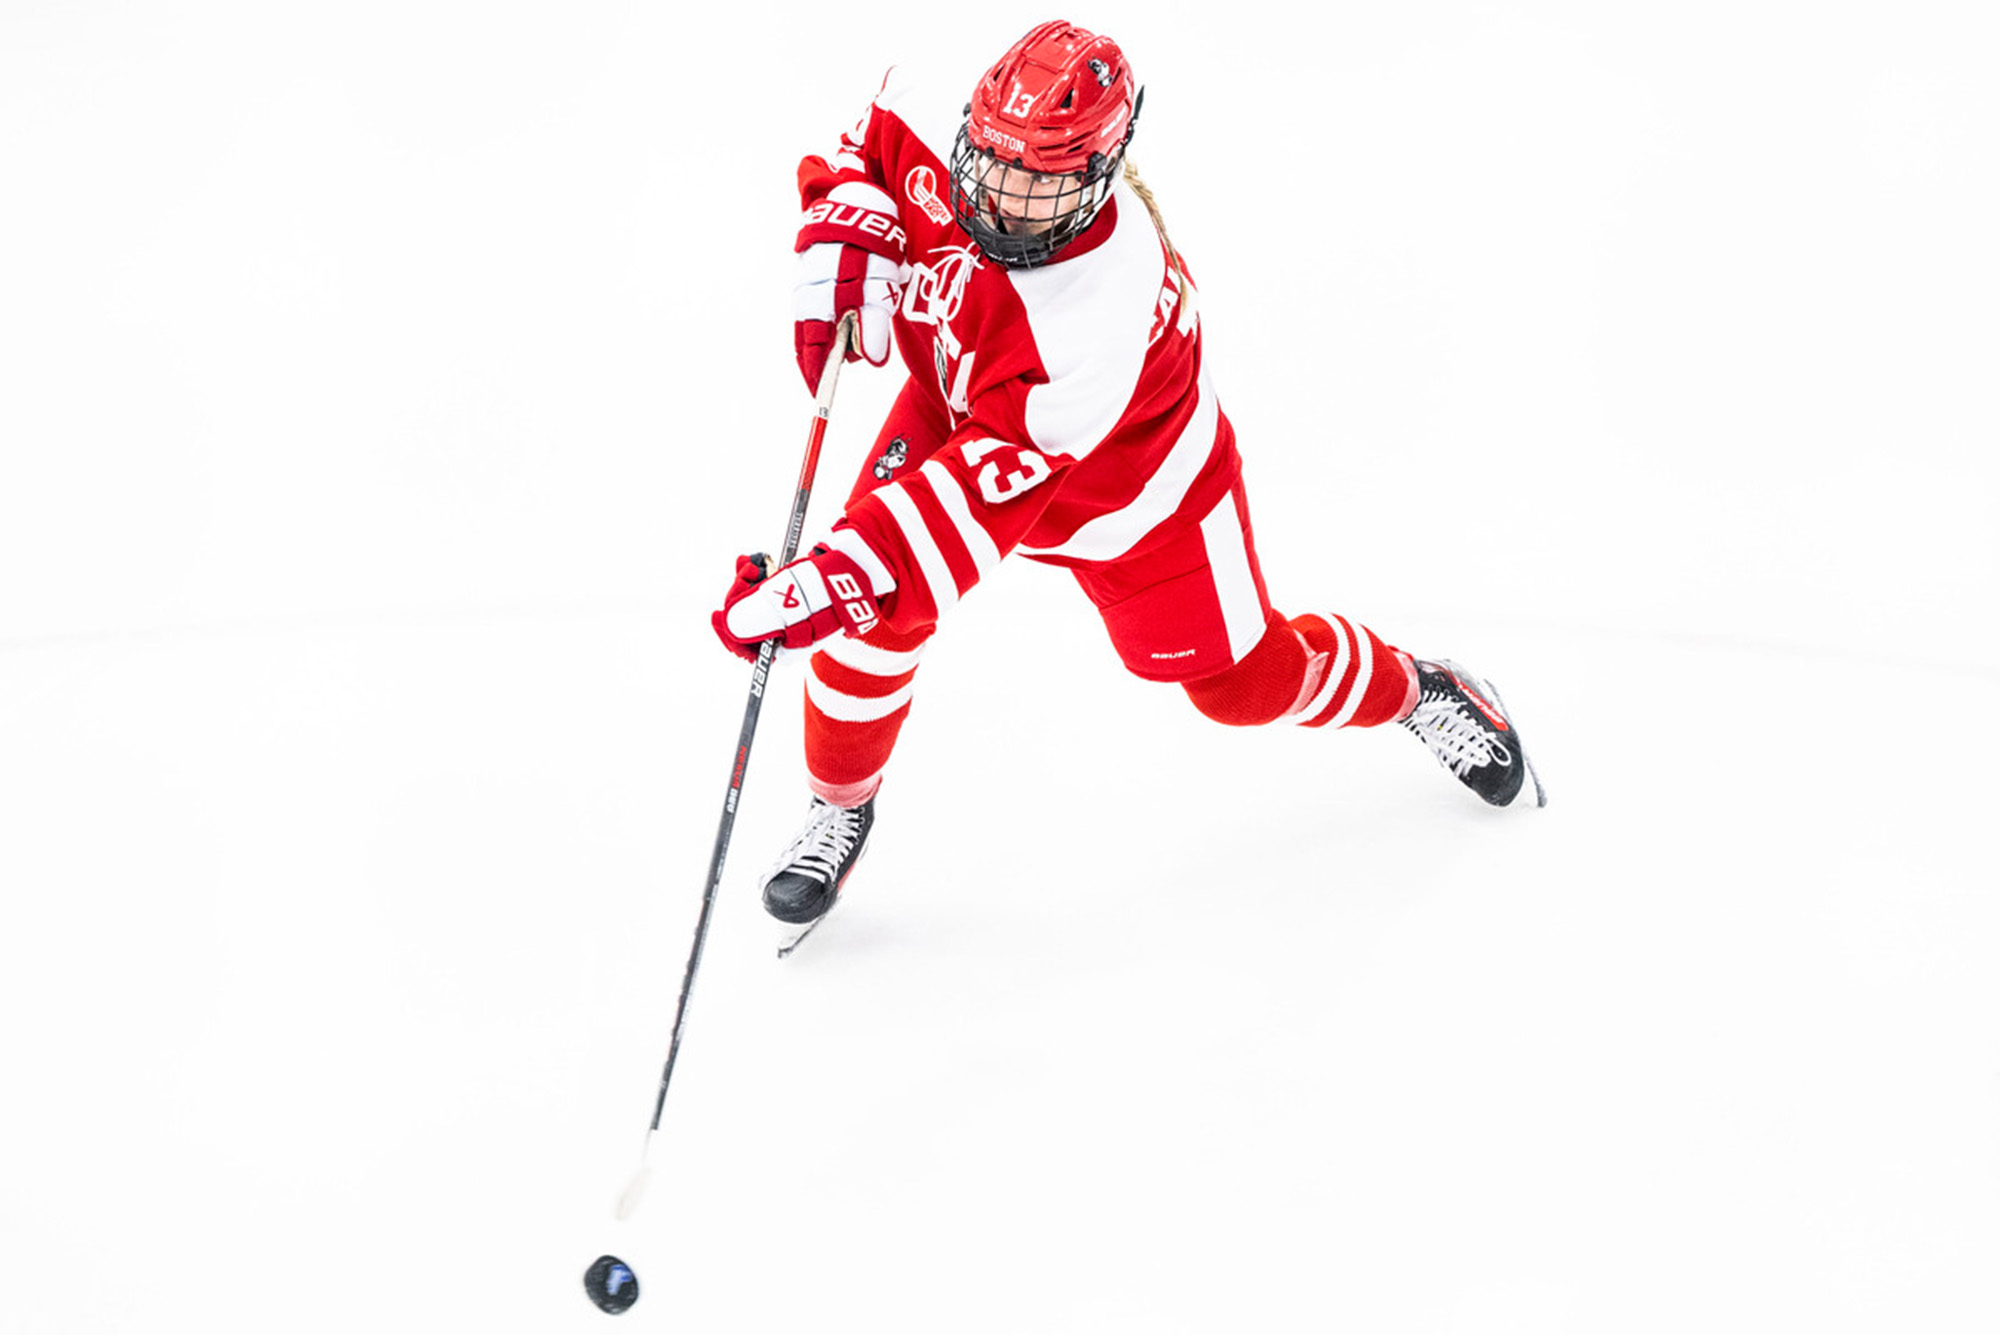 Photo: A BU women's hockey player in red and white uniform shoot the puck down the ice during a recent game